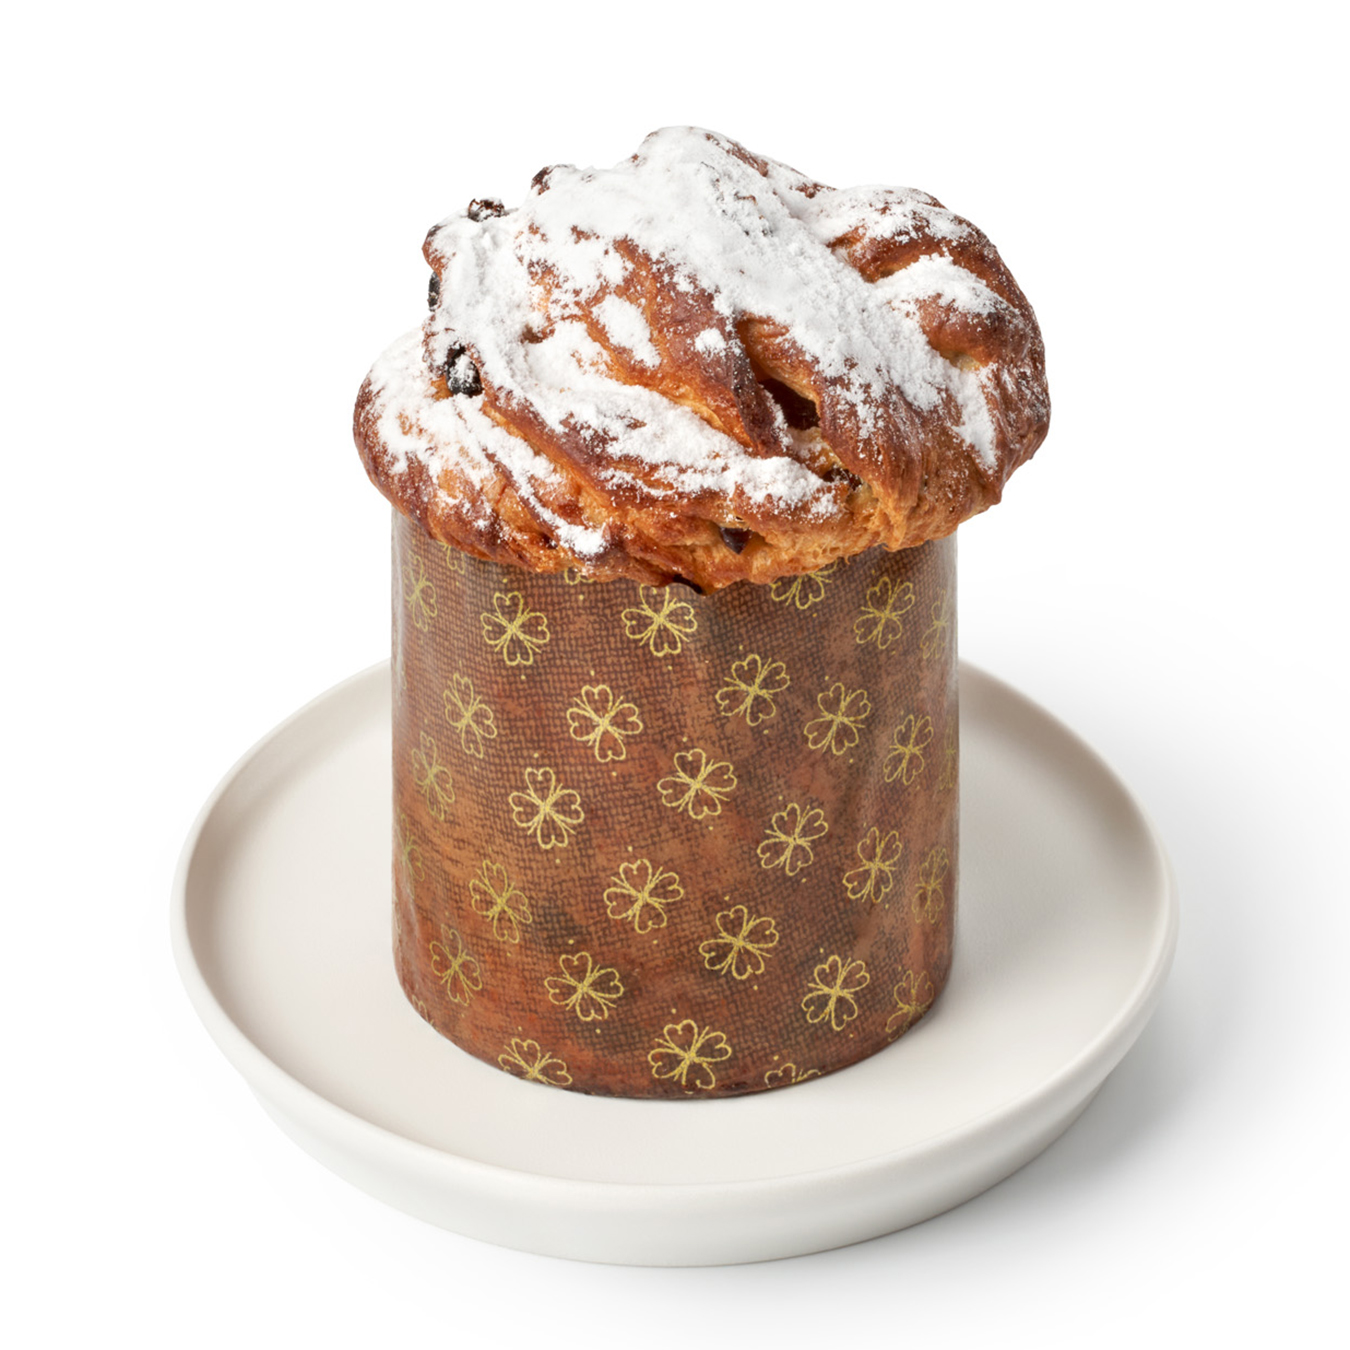 Cruffin on butter 230g